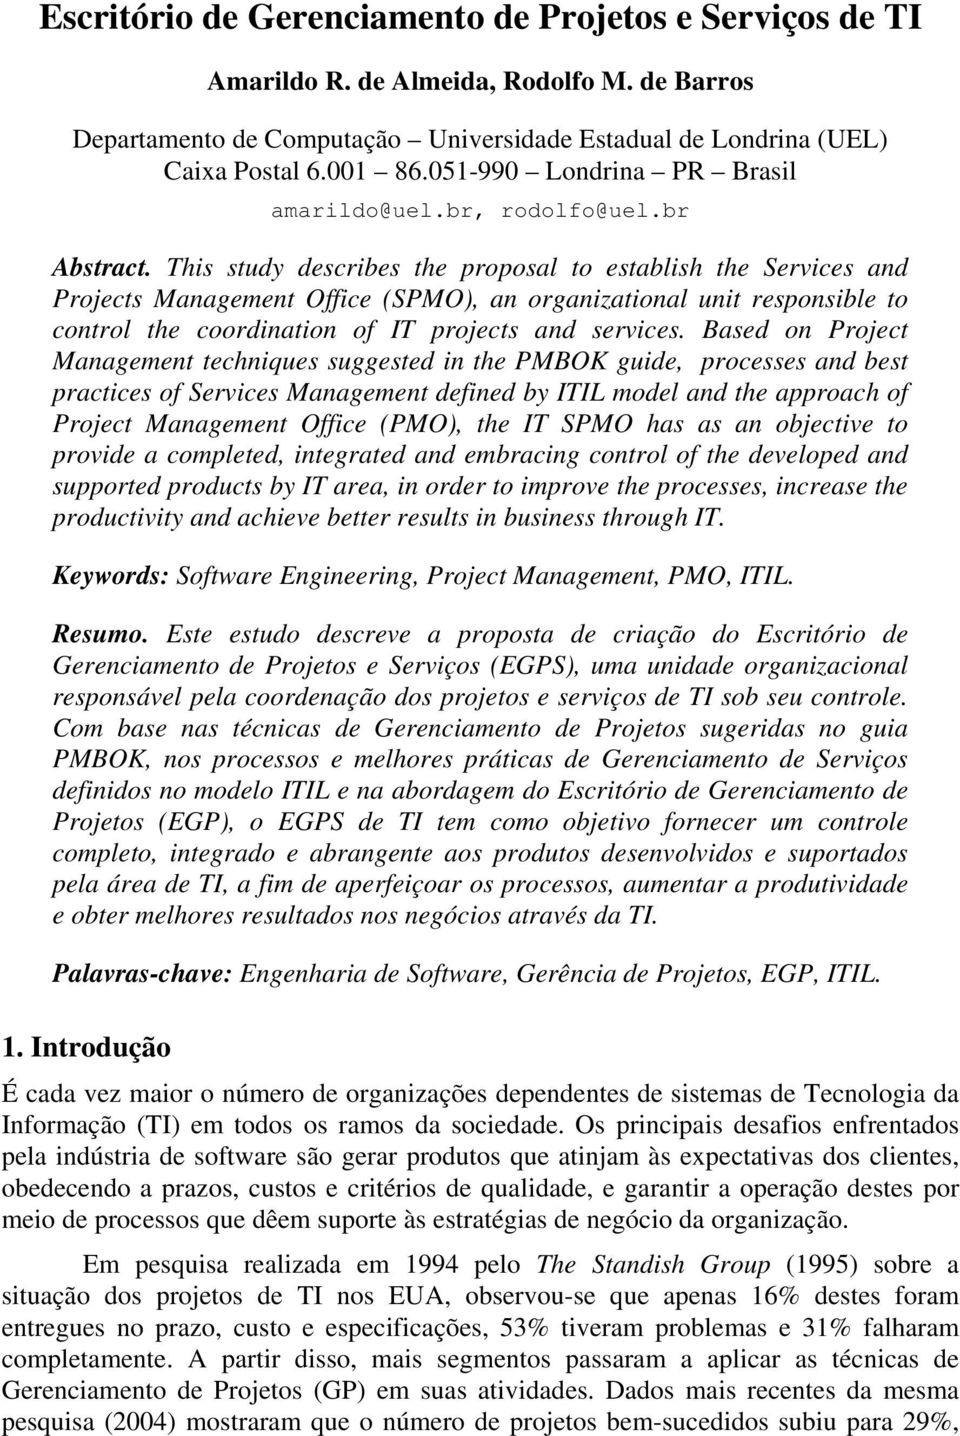 This study describes the proposal to establish the Services and Projects Management Office (SPMO), an organizational unit responsible to control the coordination of IT projects and services.